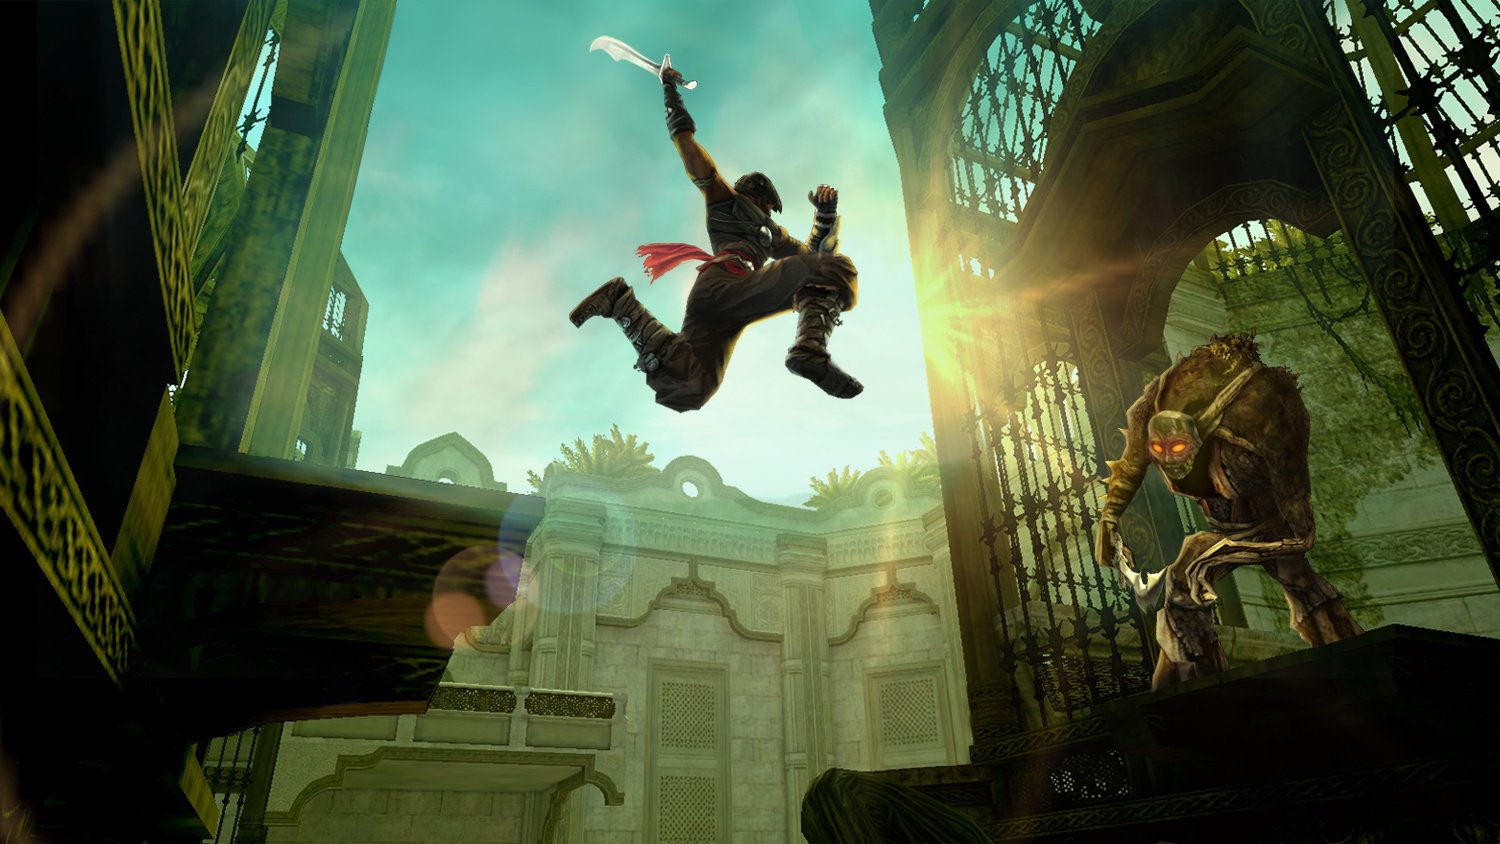 Review: Consequence-Free Prince of Persia Reduces Frustration